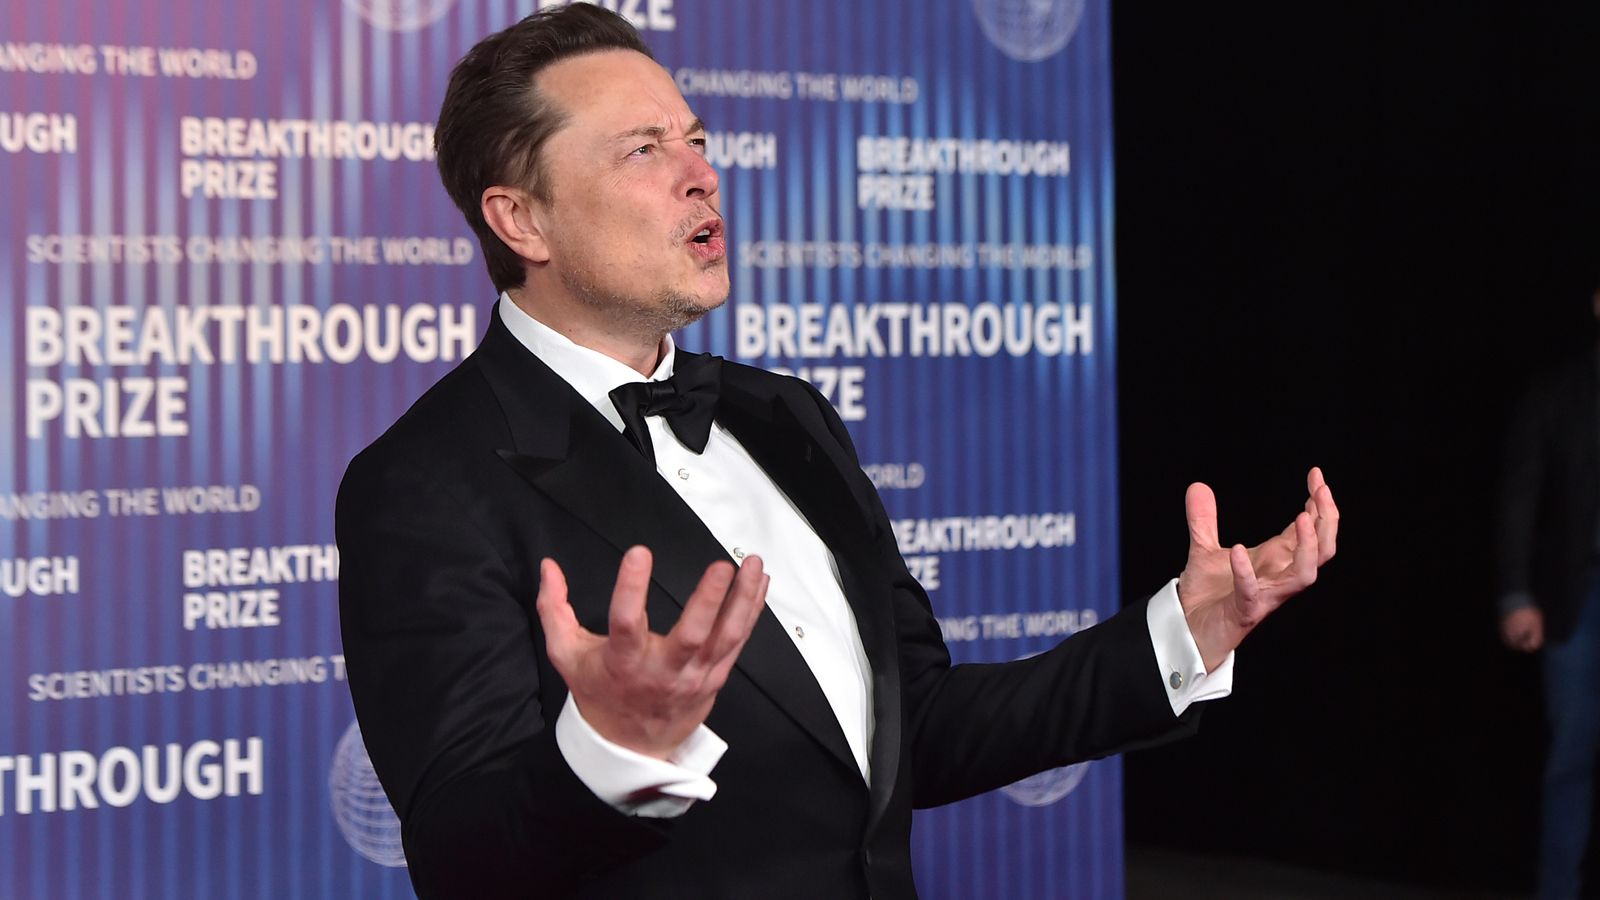 'Is this Britain or Soviet Union?': Elon Musk hits out after video appears to show man arrested for Facebook comments